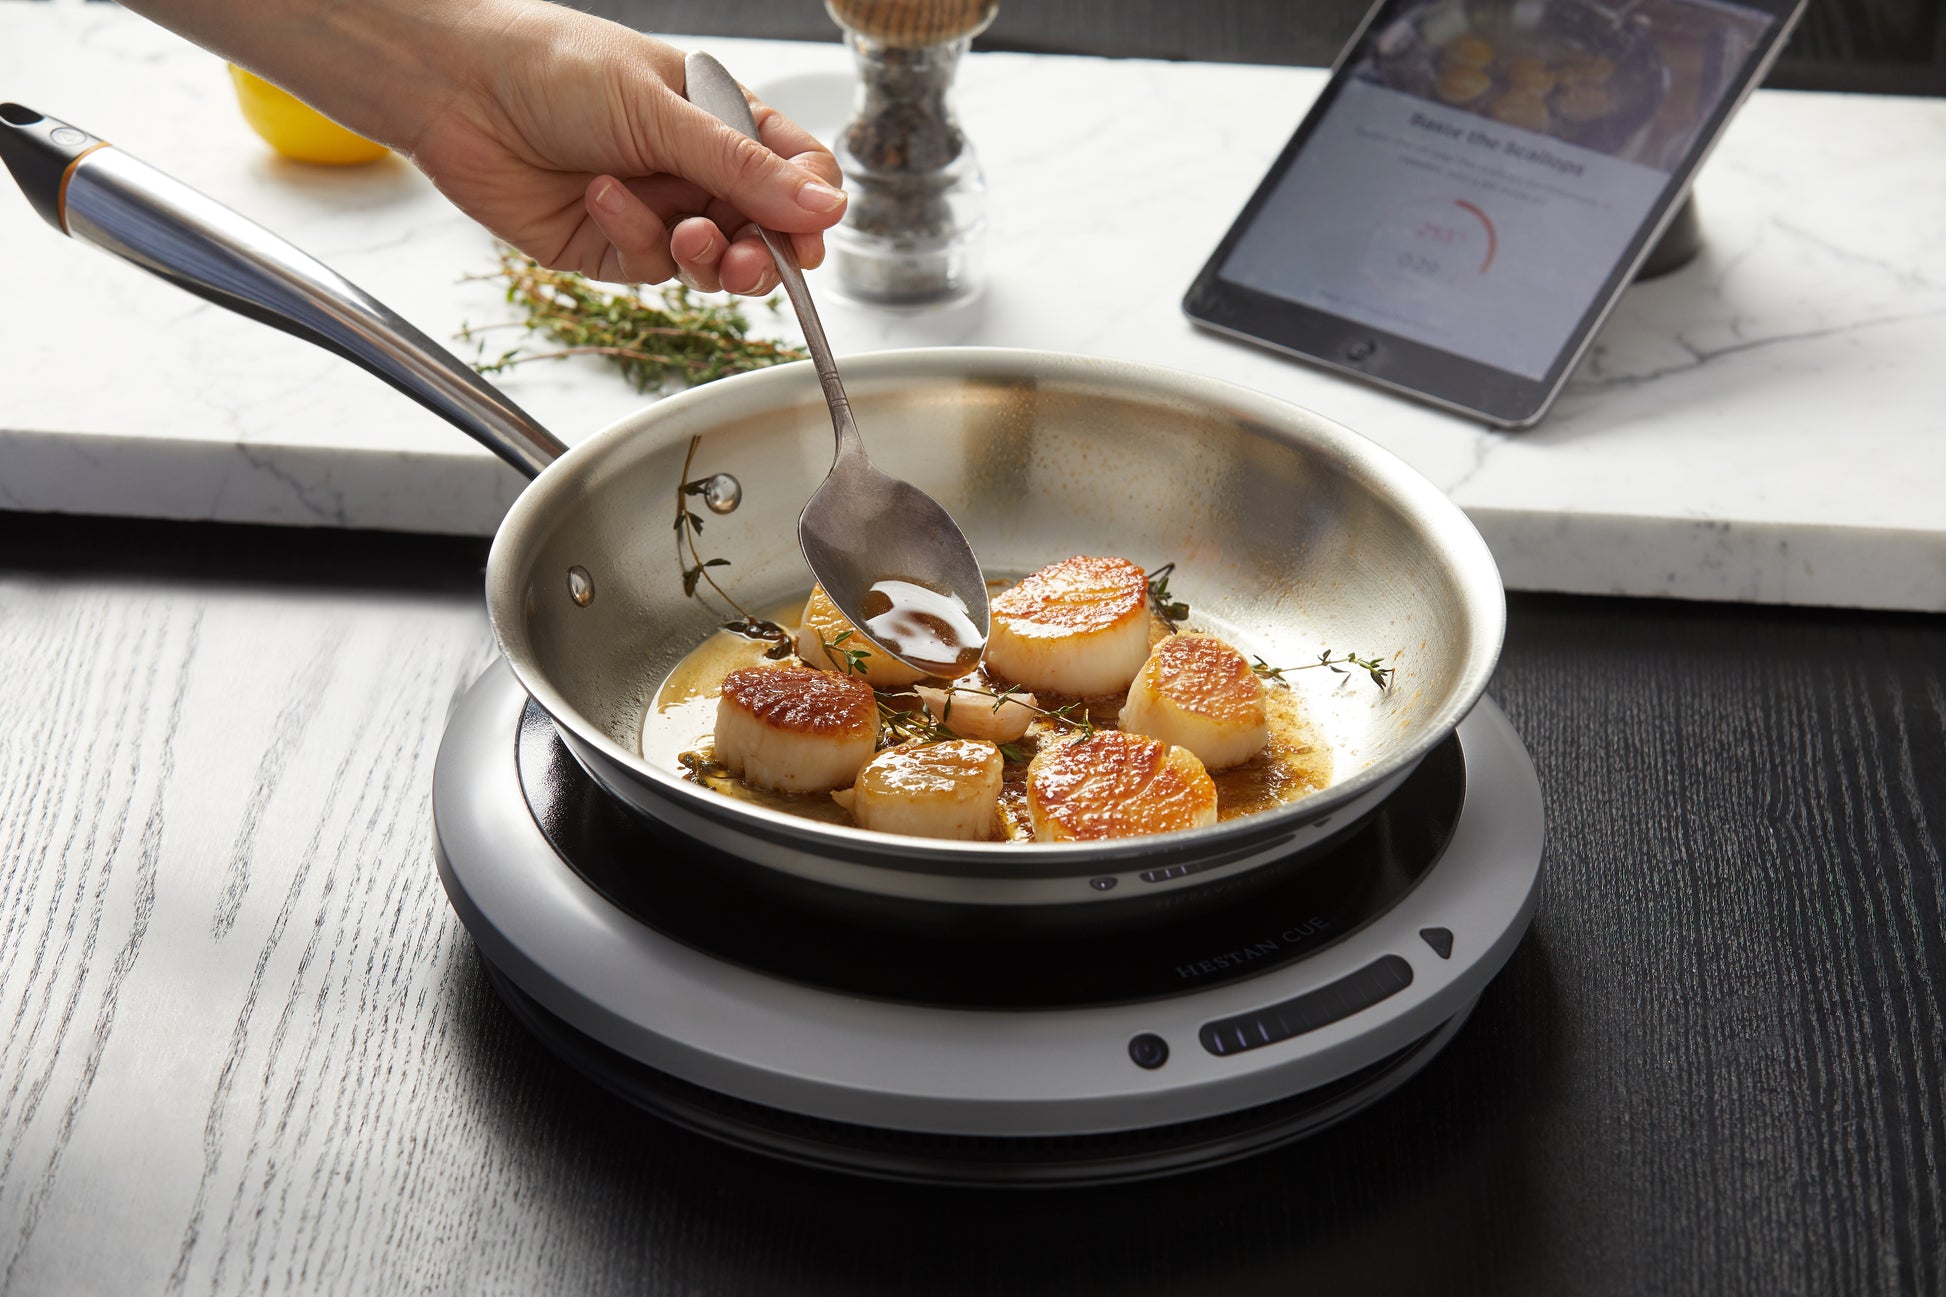 SmartChef Induction Cooktop, Bluetooth enabled